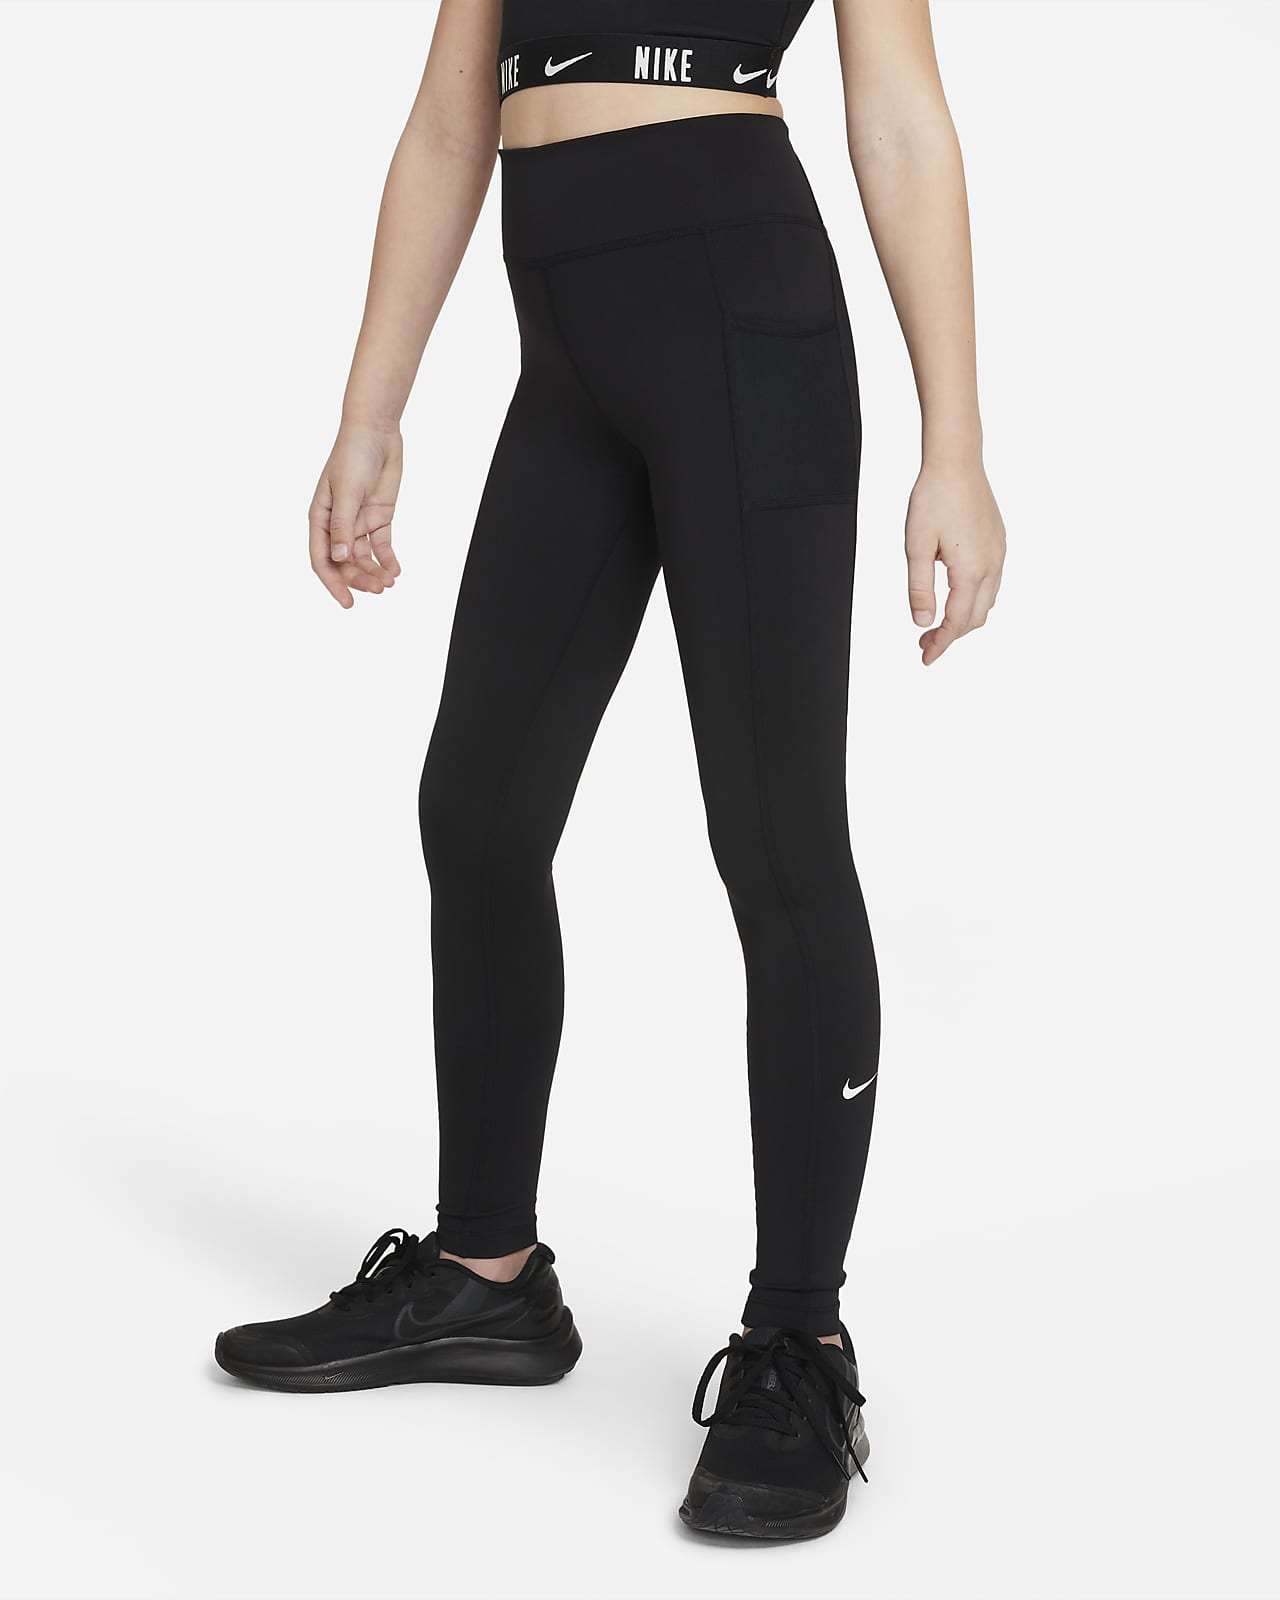 Women's Workout & Gym Clothes - Gymshark